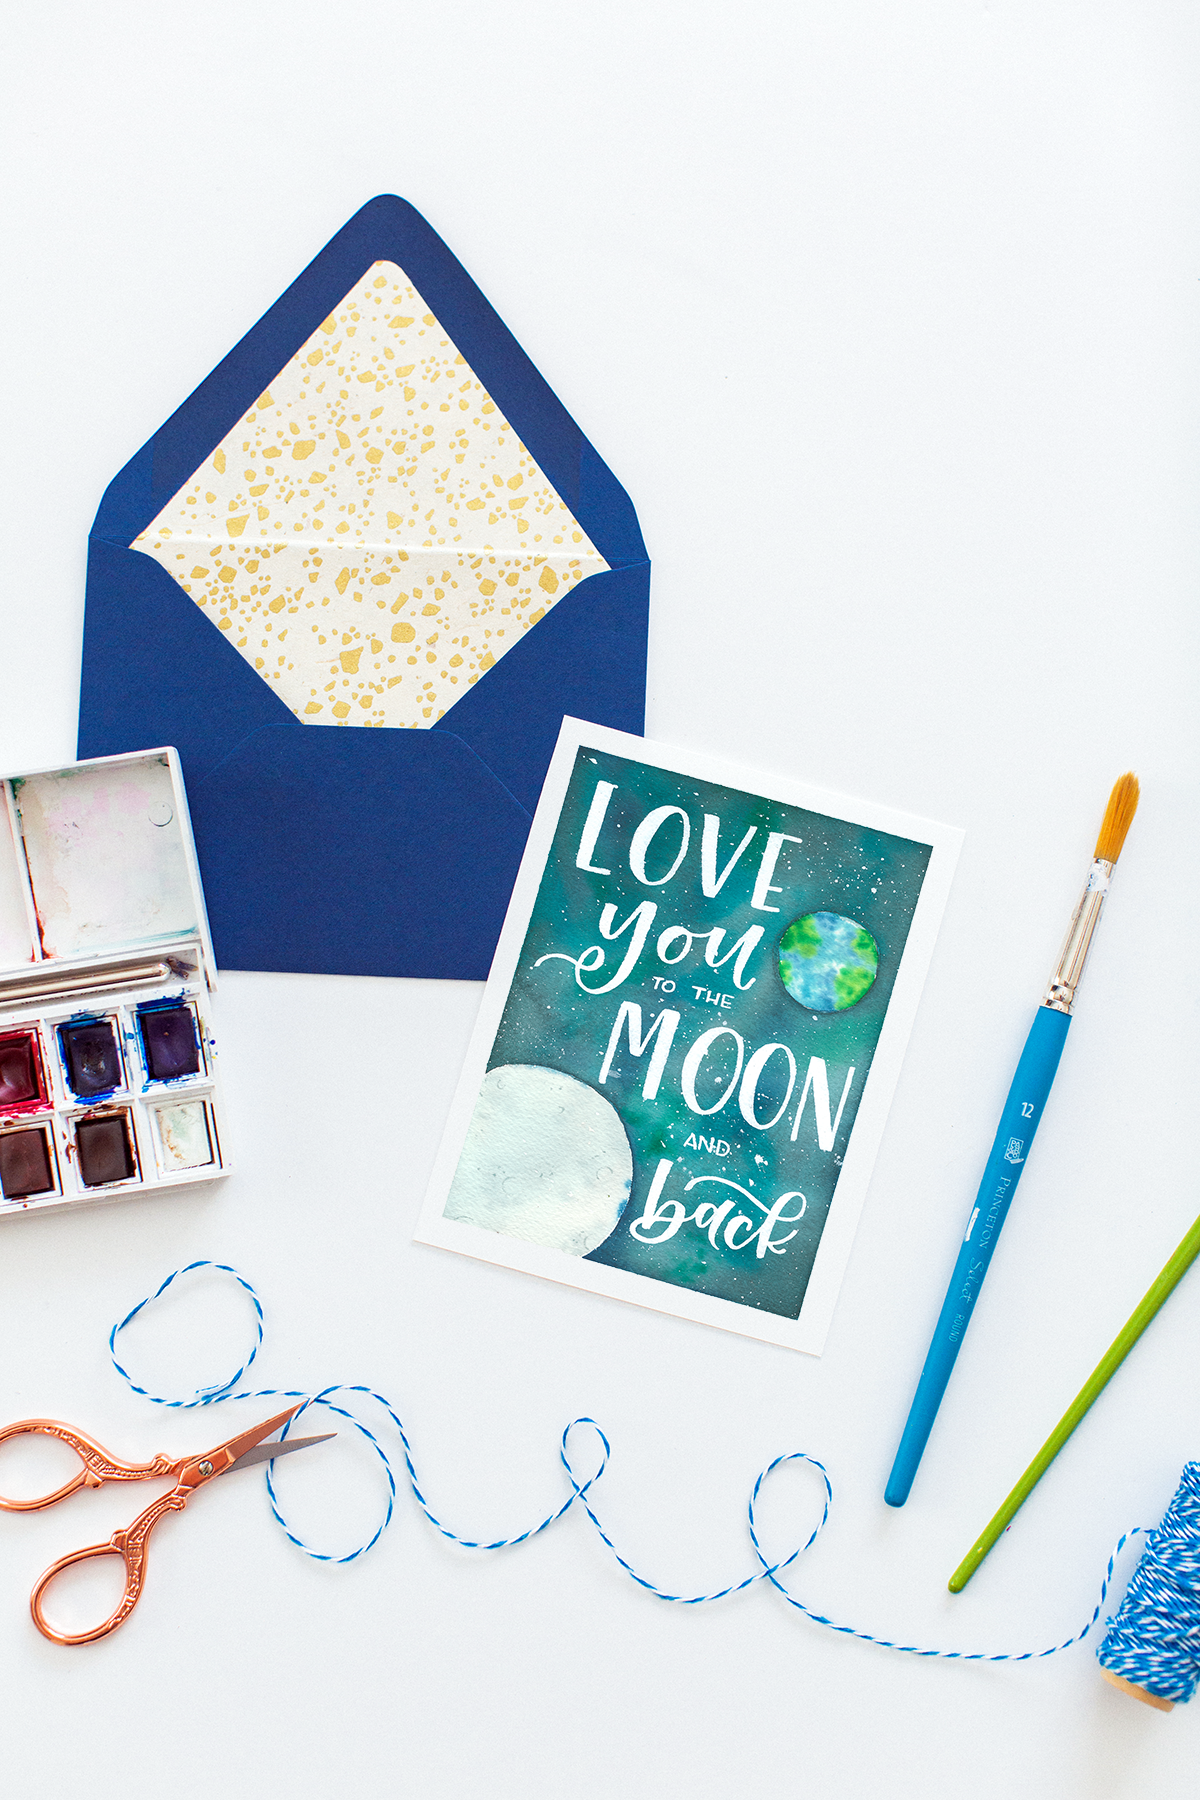 Love You to the Moon and Back Card